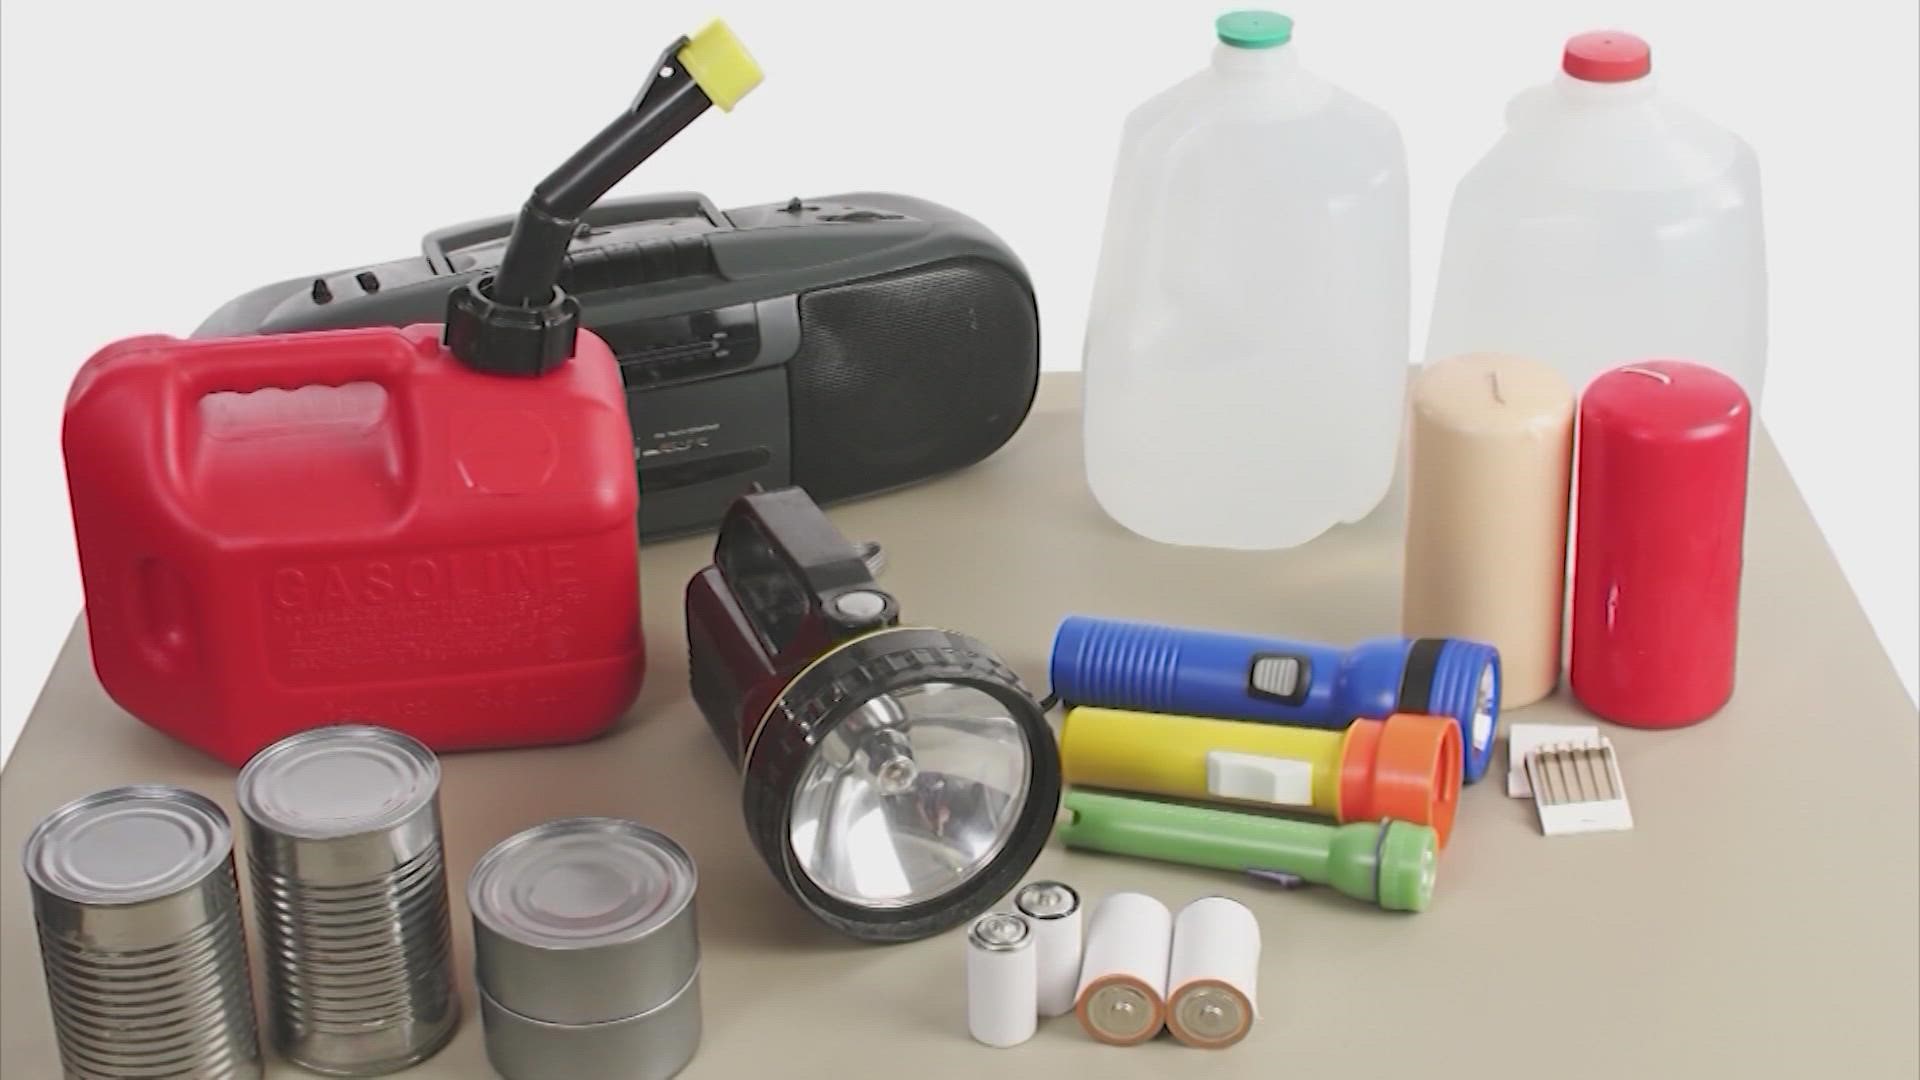 With the start of hurricane season, the time to get supplies and upgrade your home is now.